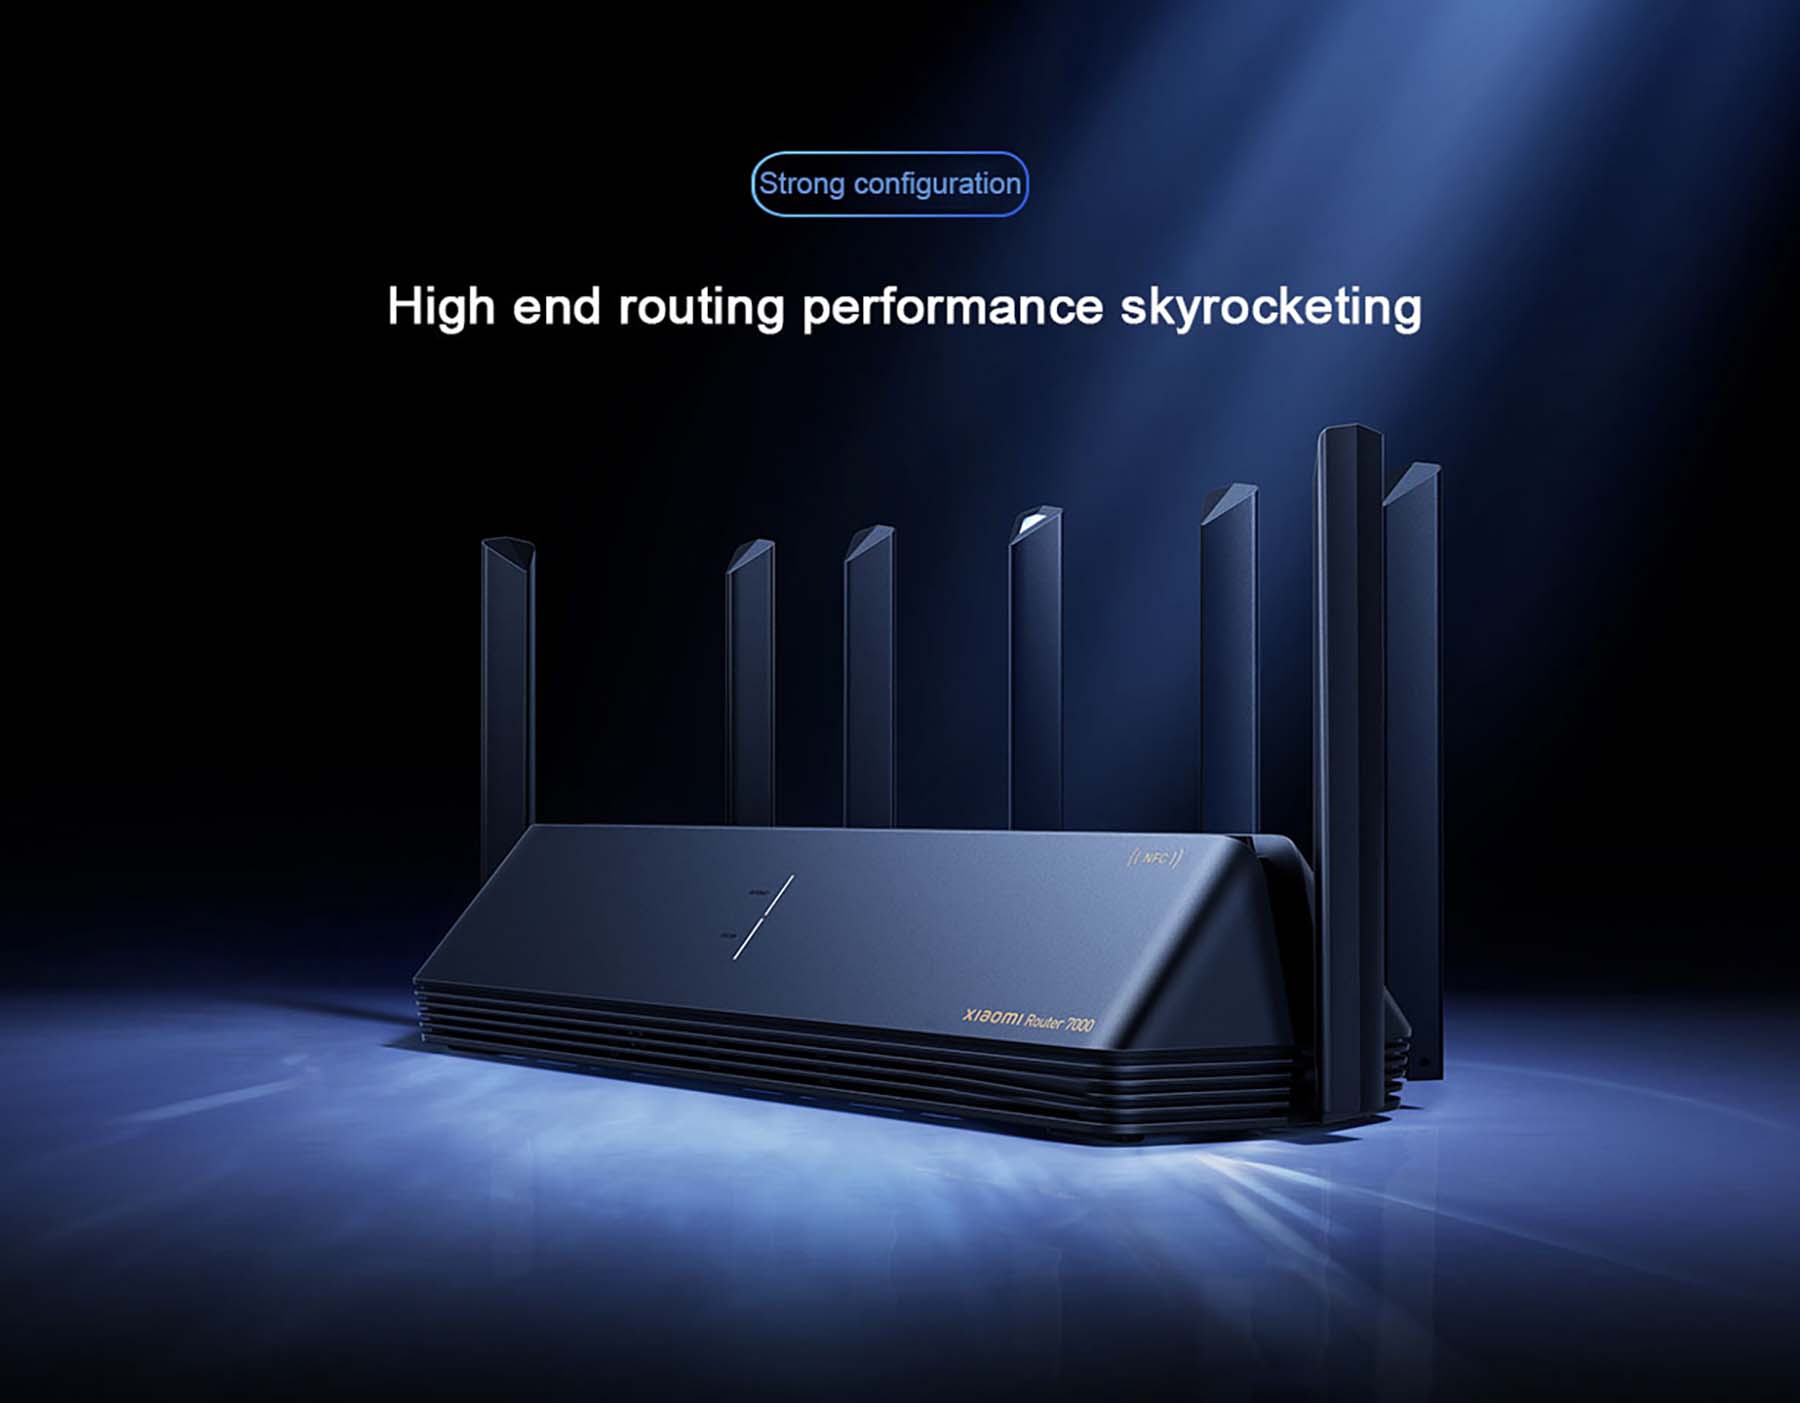 Xiaomi BE7000 WiFi 7 Router Announced With Qualcomm Networking Pro 820 And  Competitive Price - Gizmochina